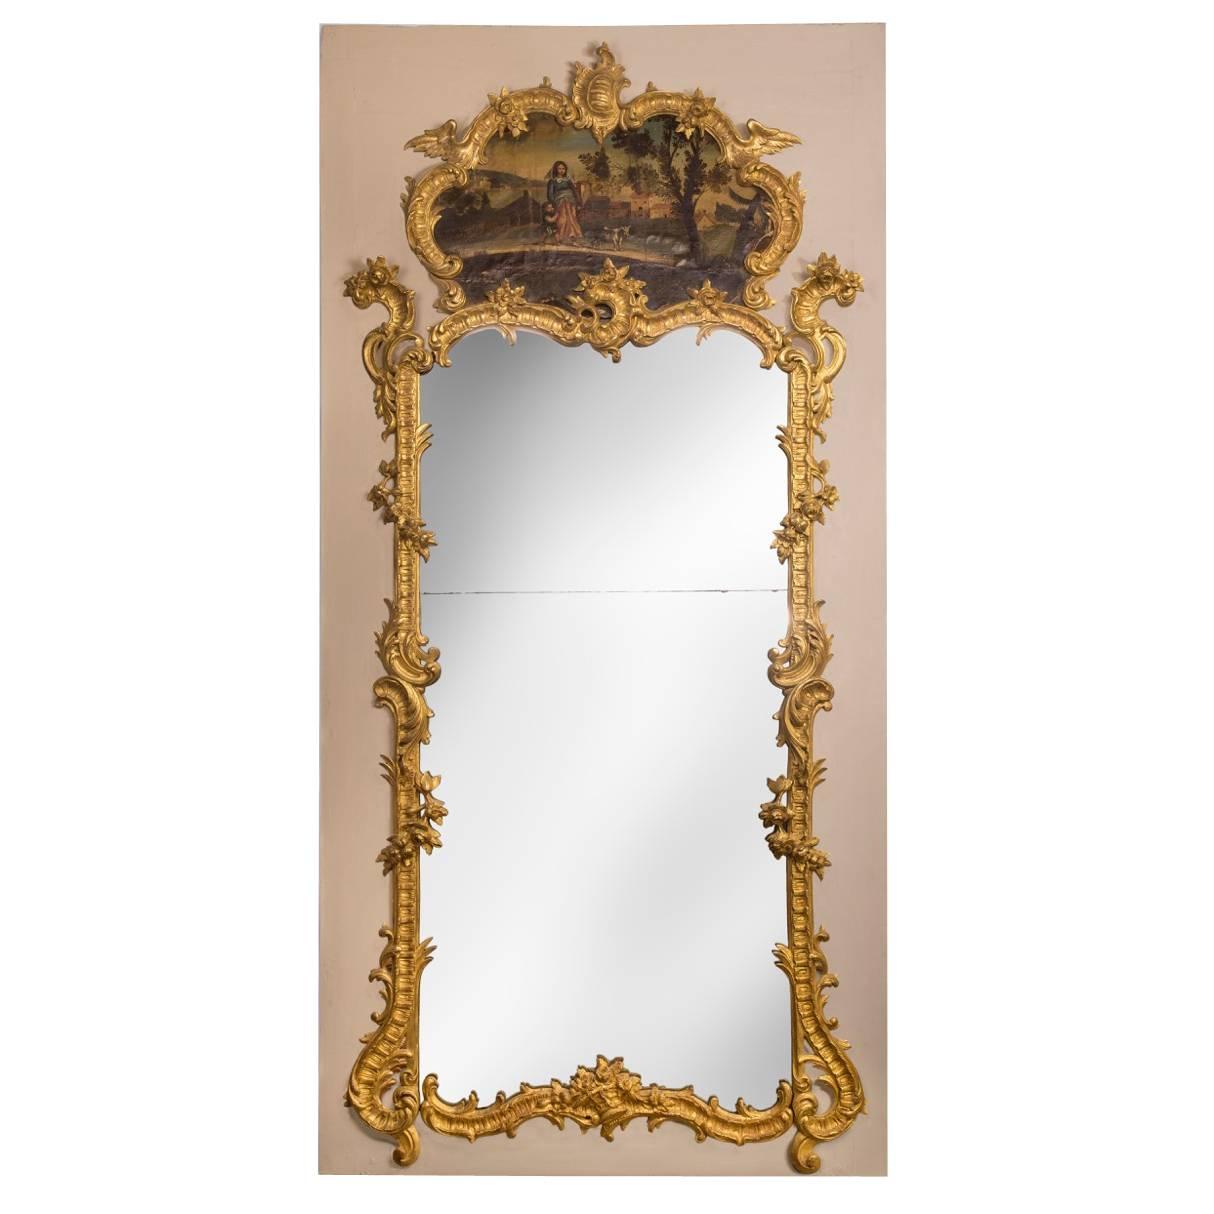 A Large Louis XV Rococo Carved Giltwood Trumeau Mirror